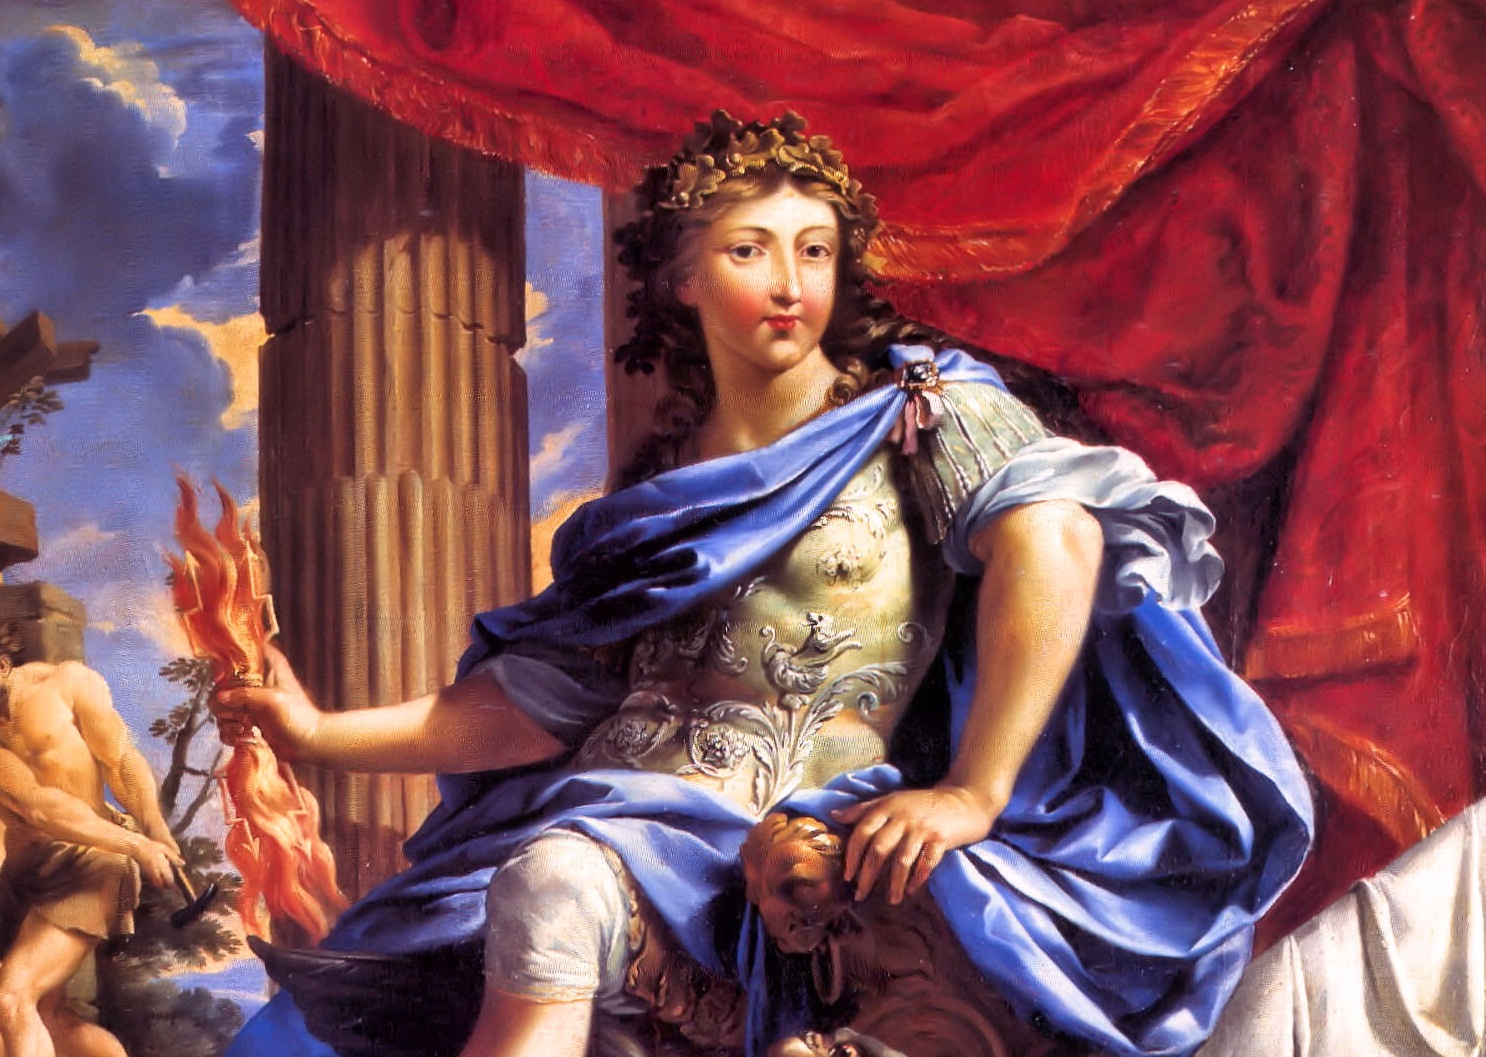 1638: Birth of the French King Louis XIV – the Most Powerful Ruler in Europe | 0